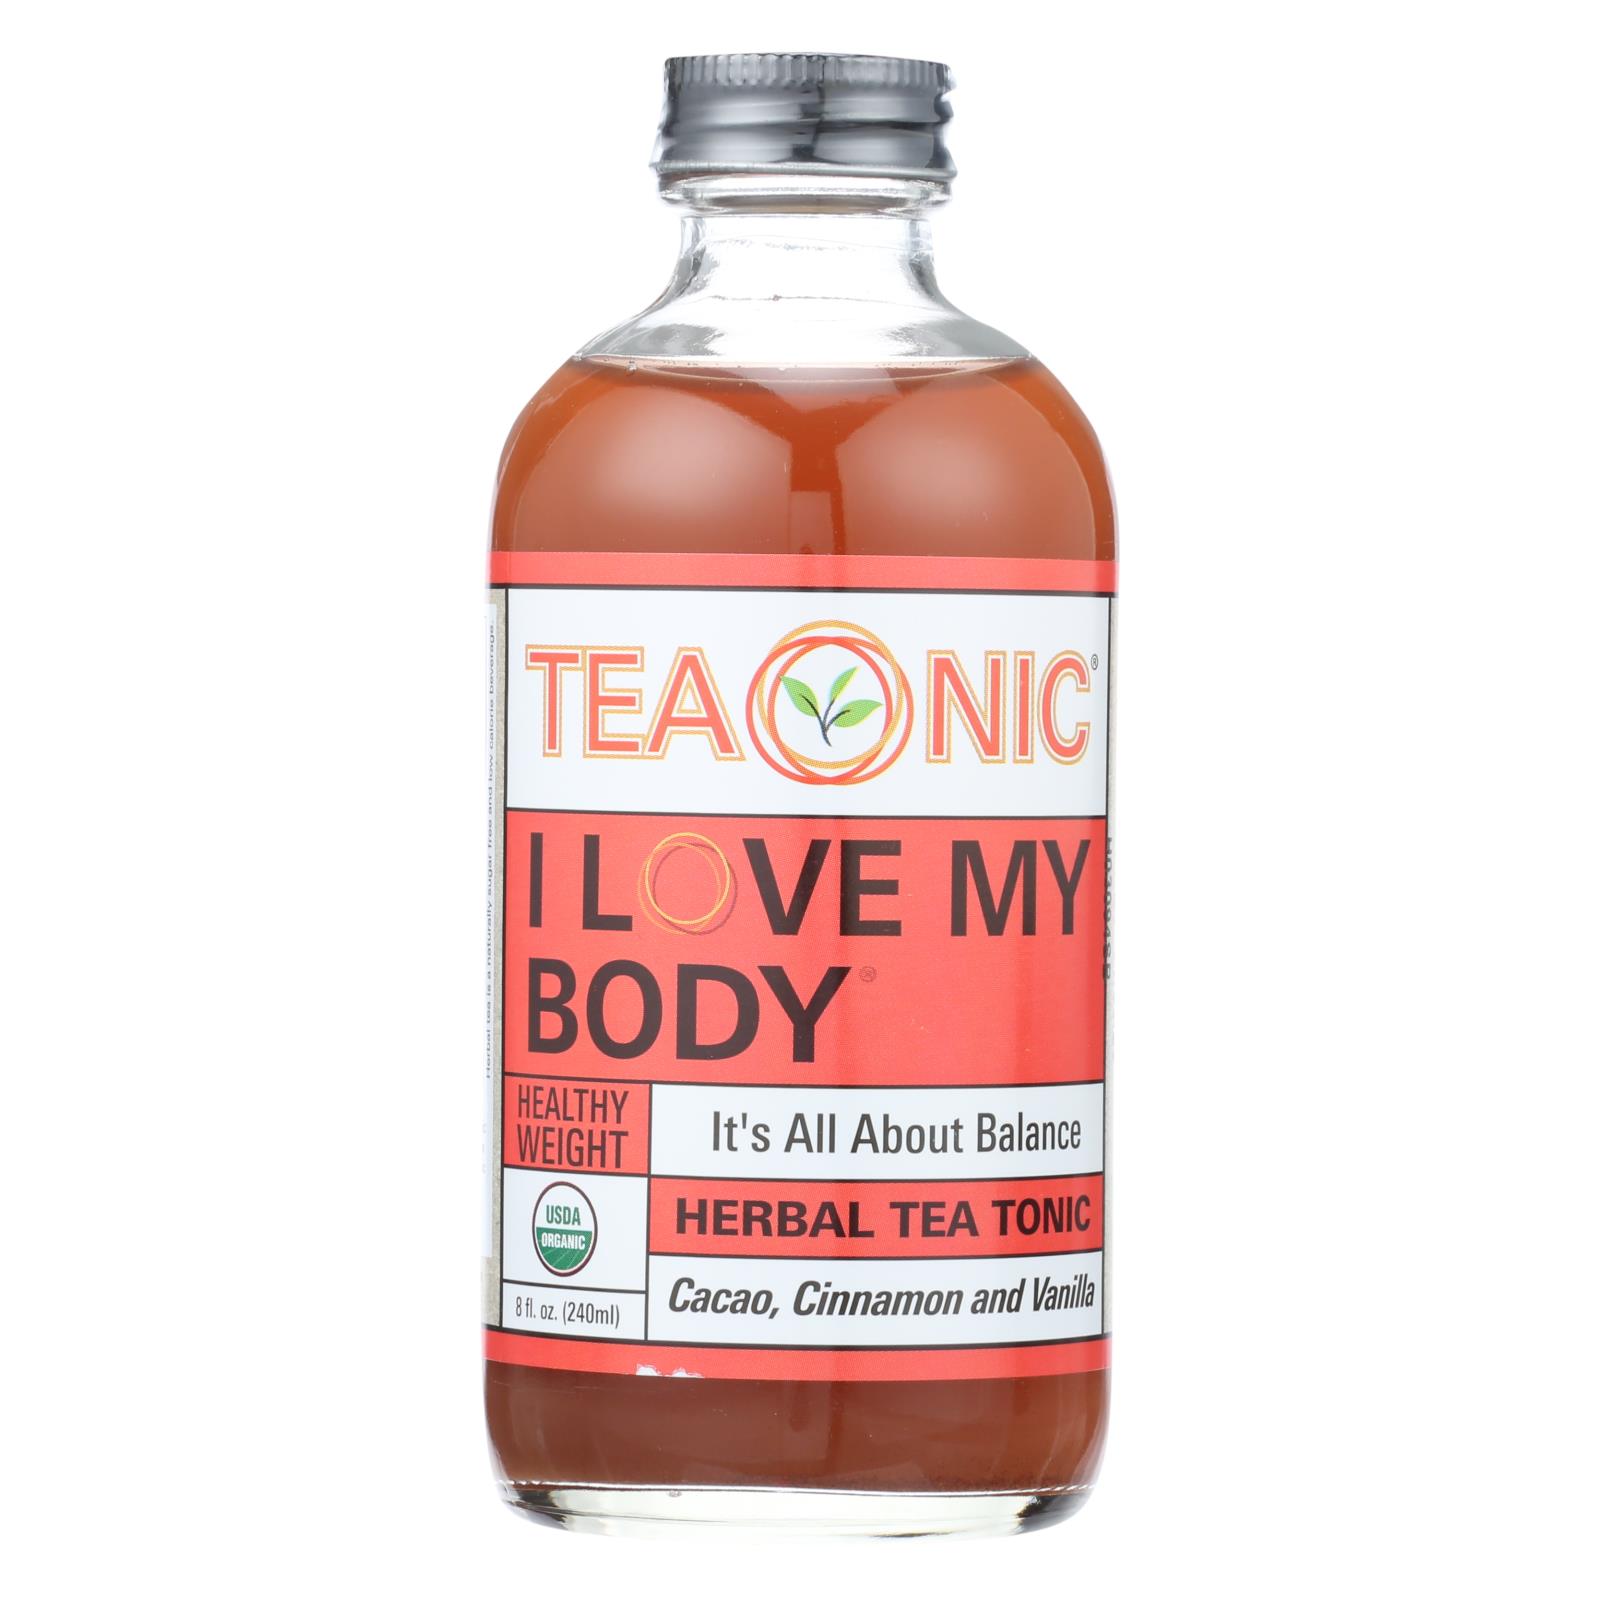 Teaonic I Love My Skinny Body Herbal Tea Supplement - Case of 6 - 8 FZ